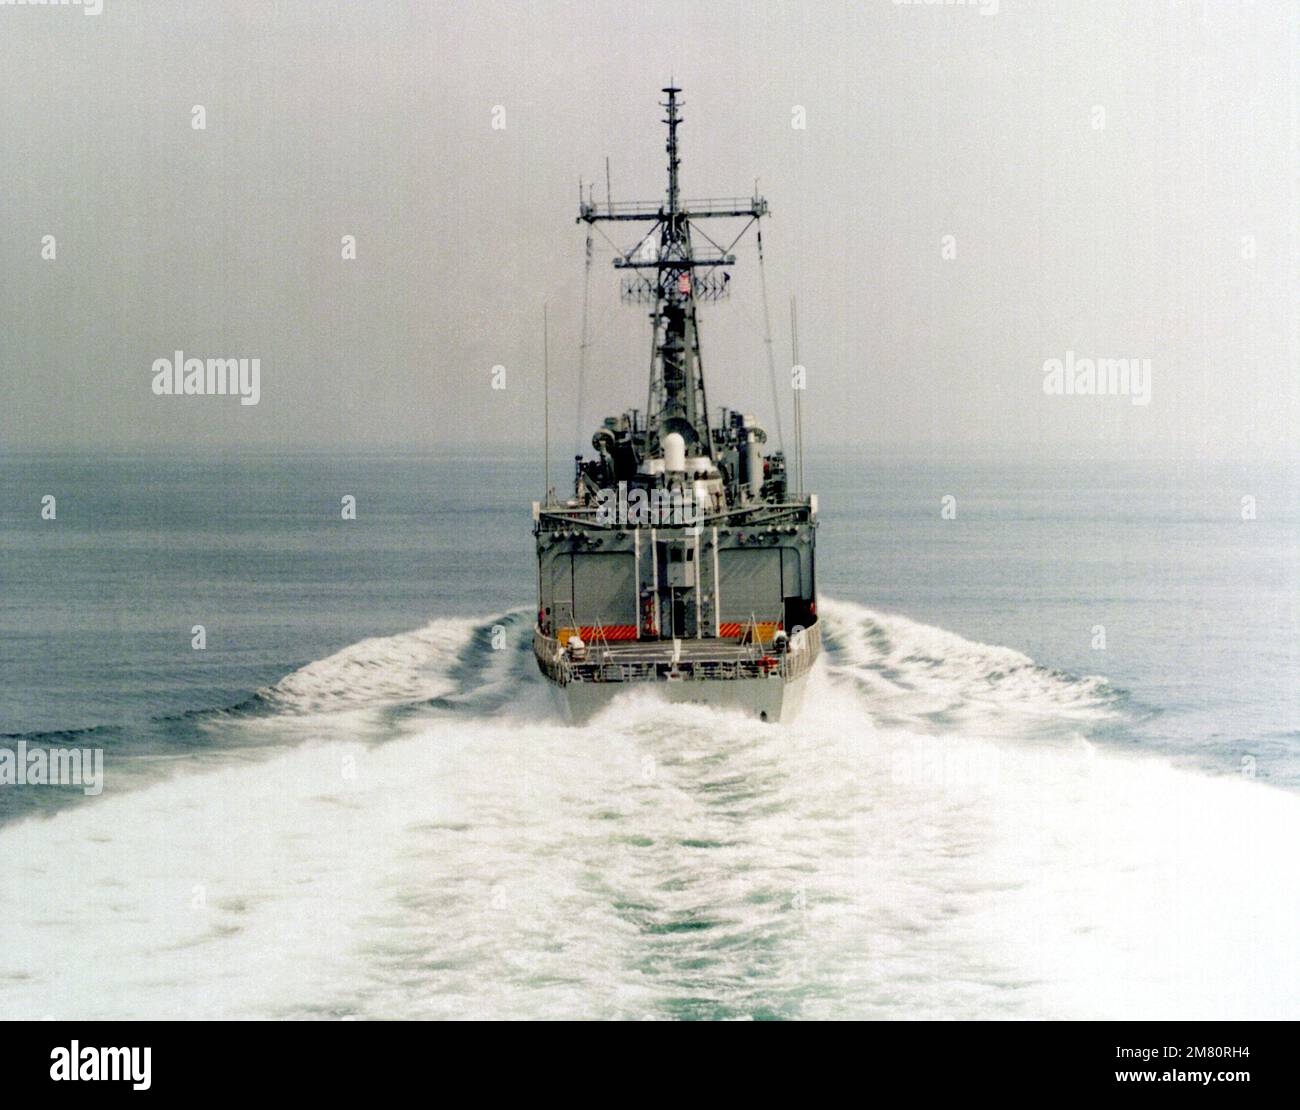 A stern view of the guided missile frigateDE WERT (FFG-45) underway during sea trials. Country: Unknown Stock Photo